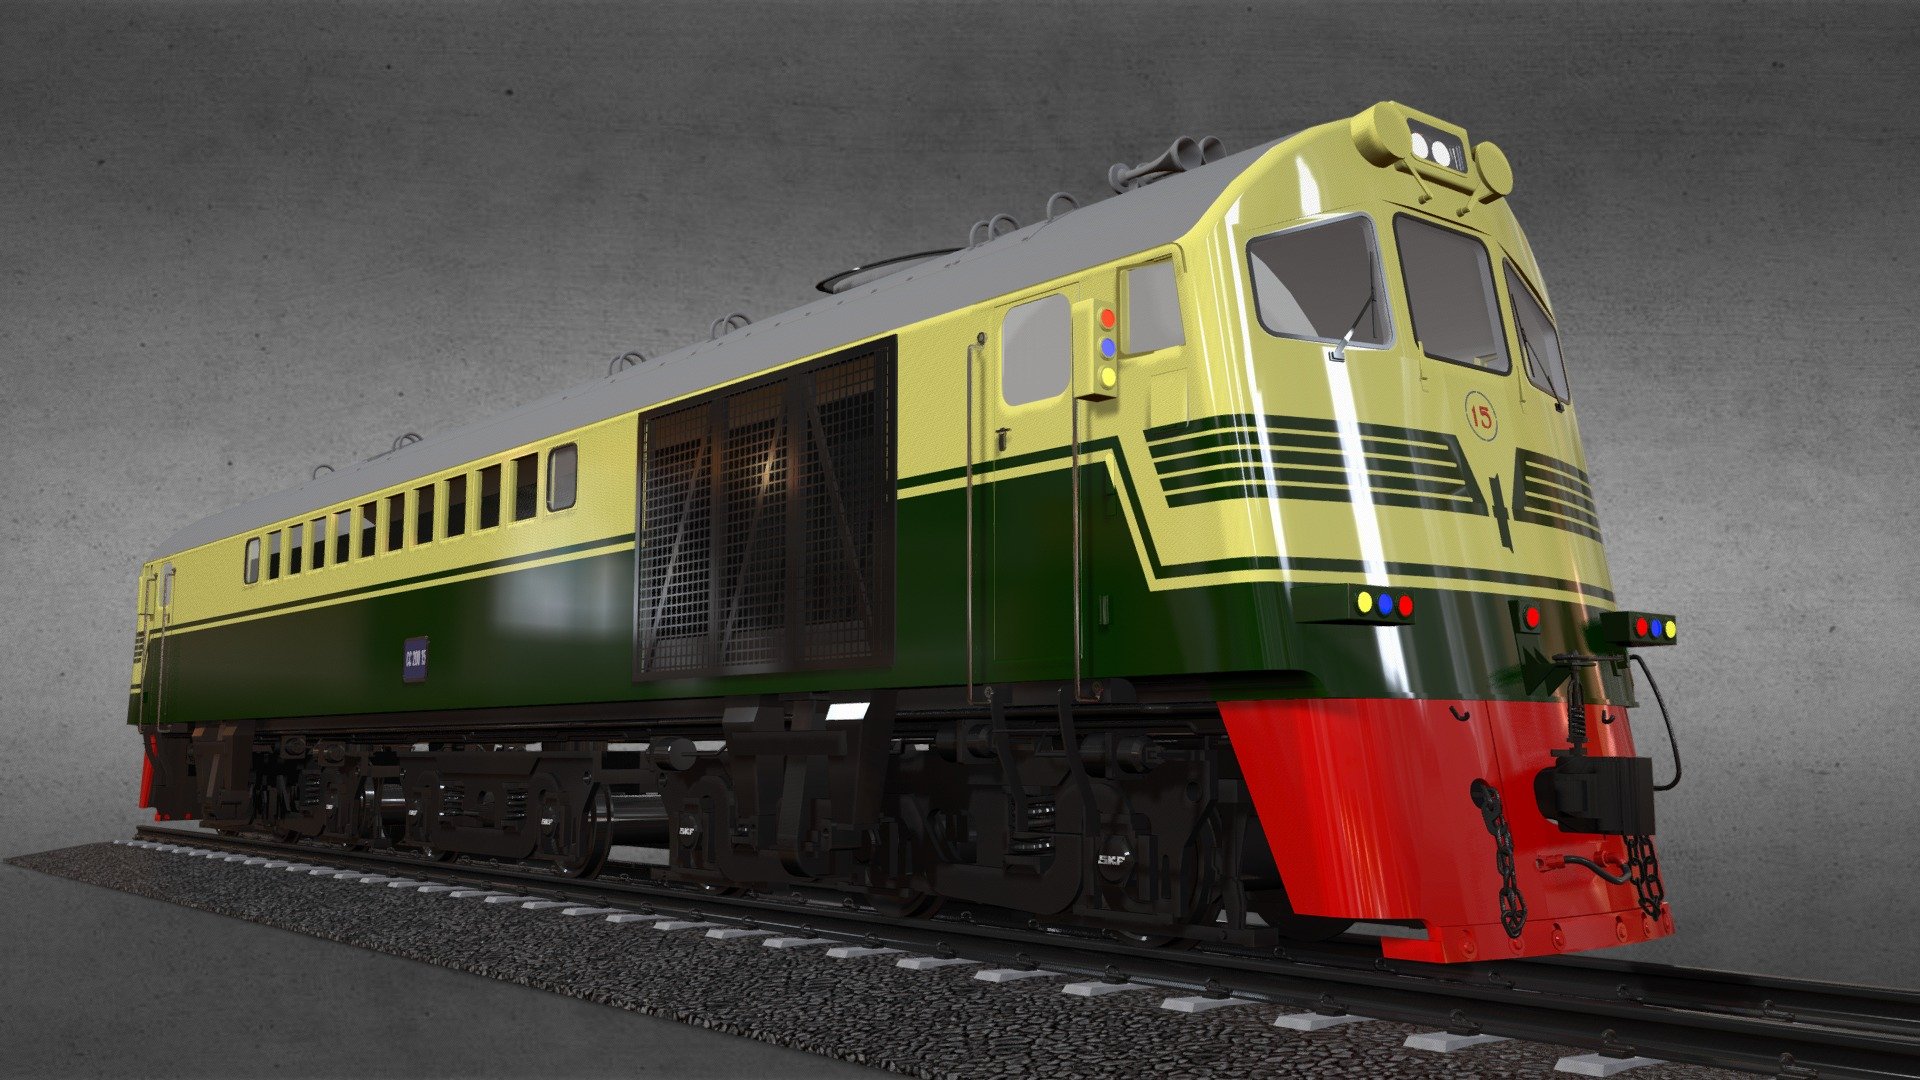 CC 200 (Alco-GE UM 106T) is a diesel-electric locomotives are owned by PT. KAI (Indonesian Railways Co.).

3D model created in Sketchup - CC 200 (Alco-GE UM 106T) - Livery Vintage - 3D model by pucohensap 3d model